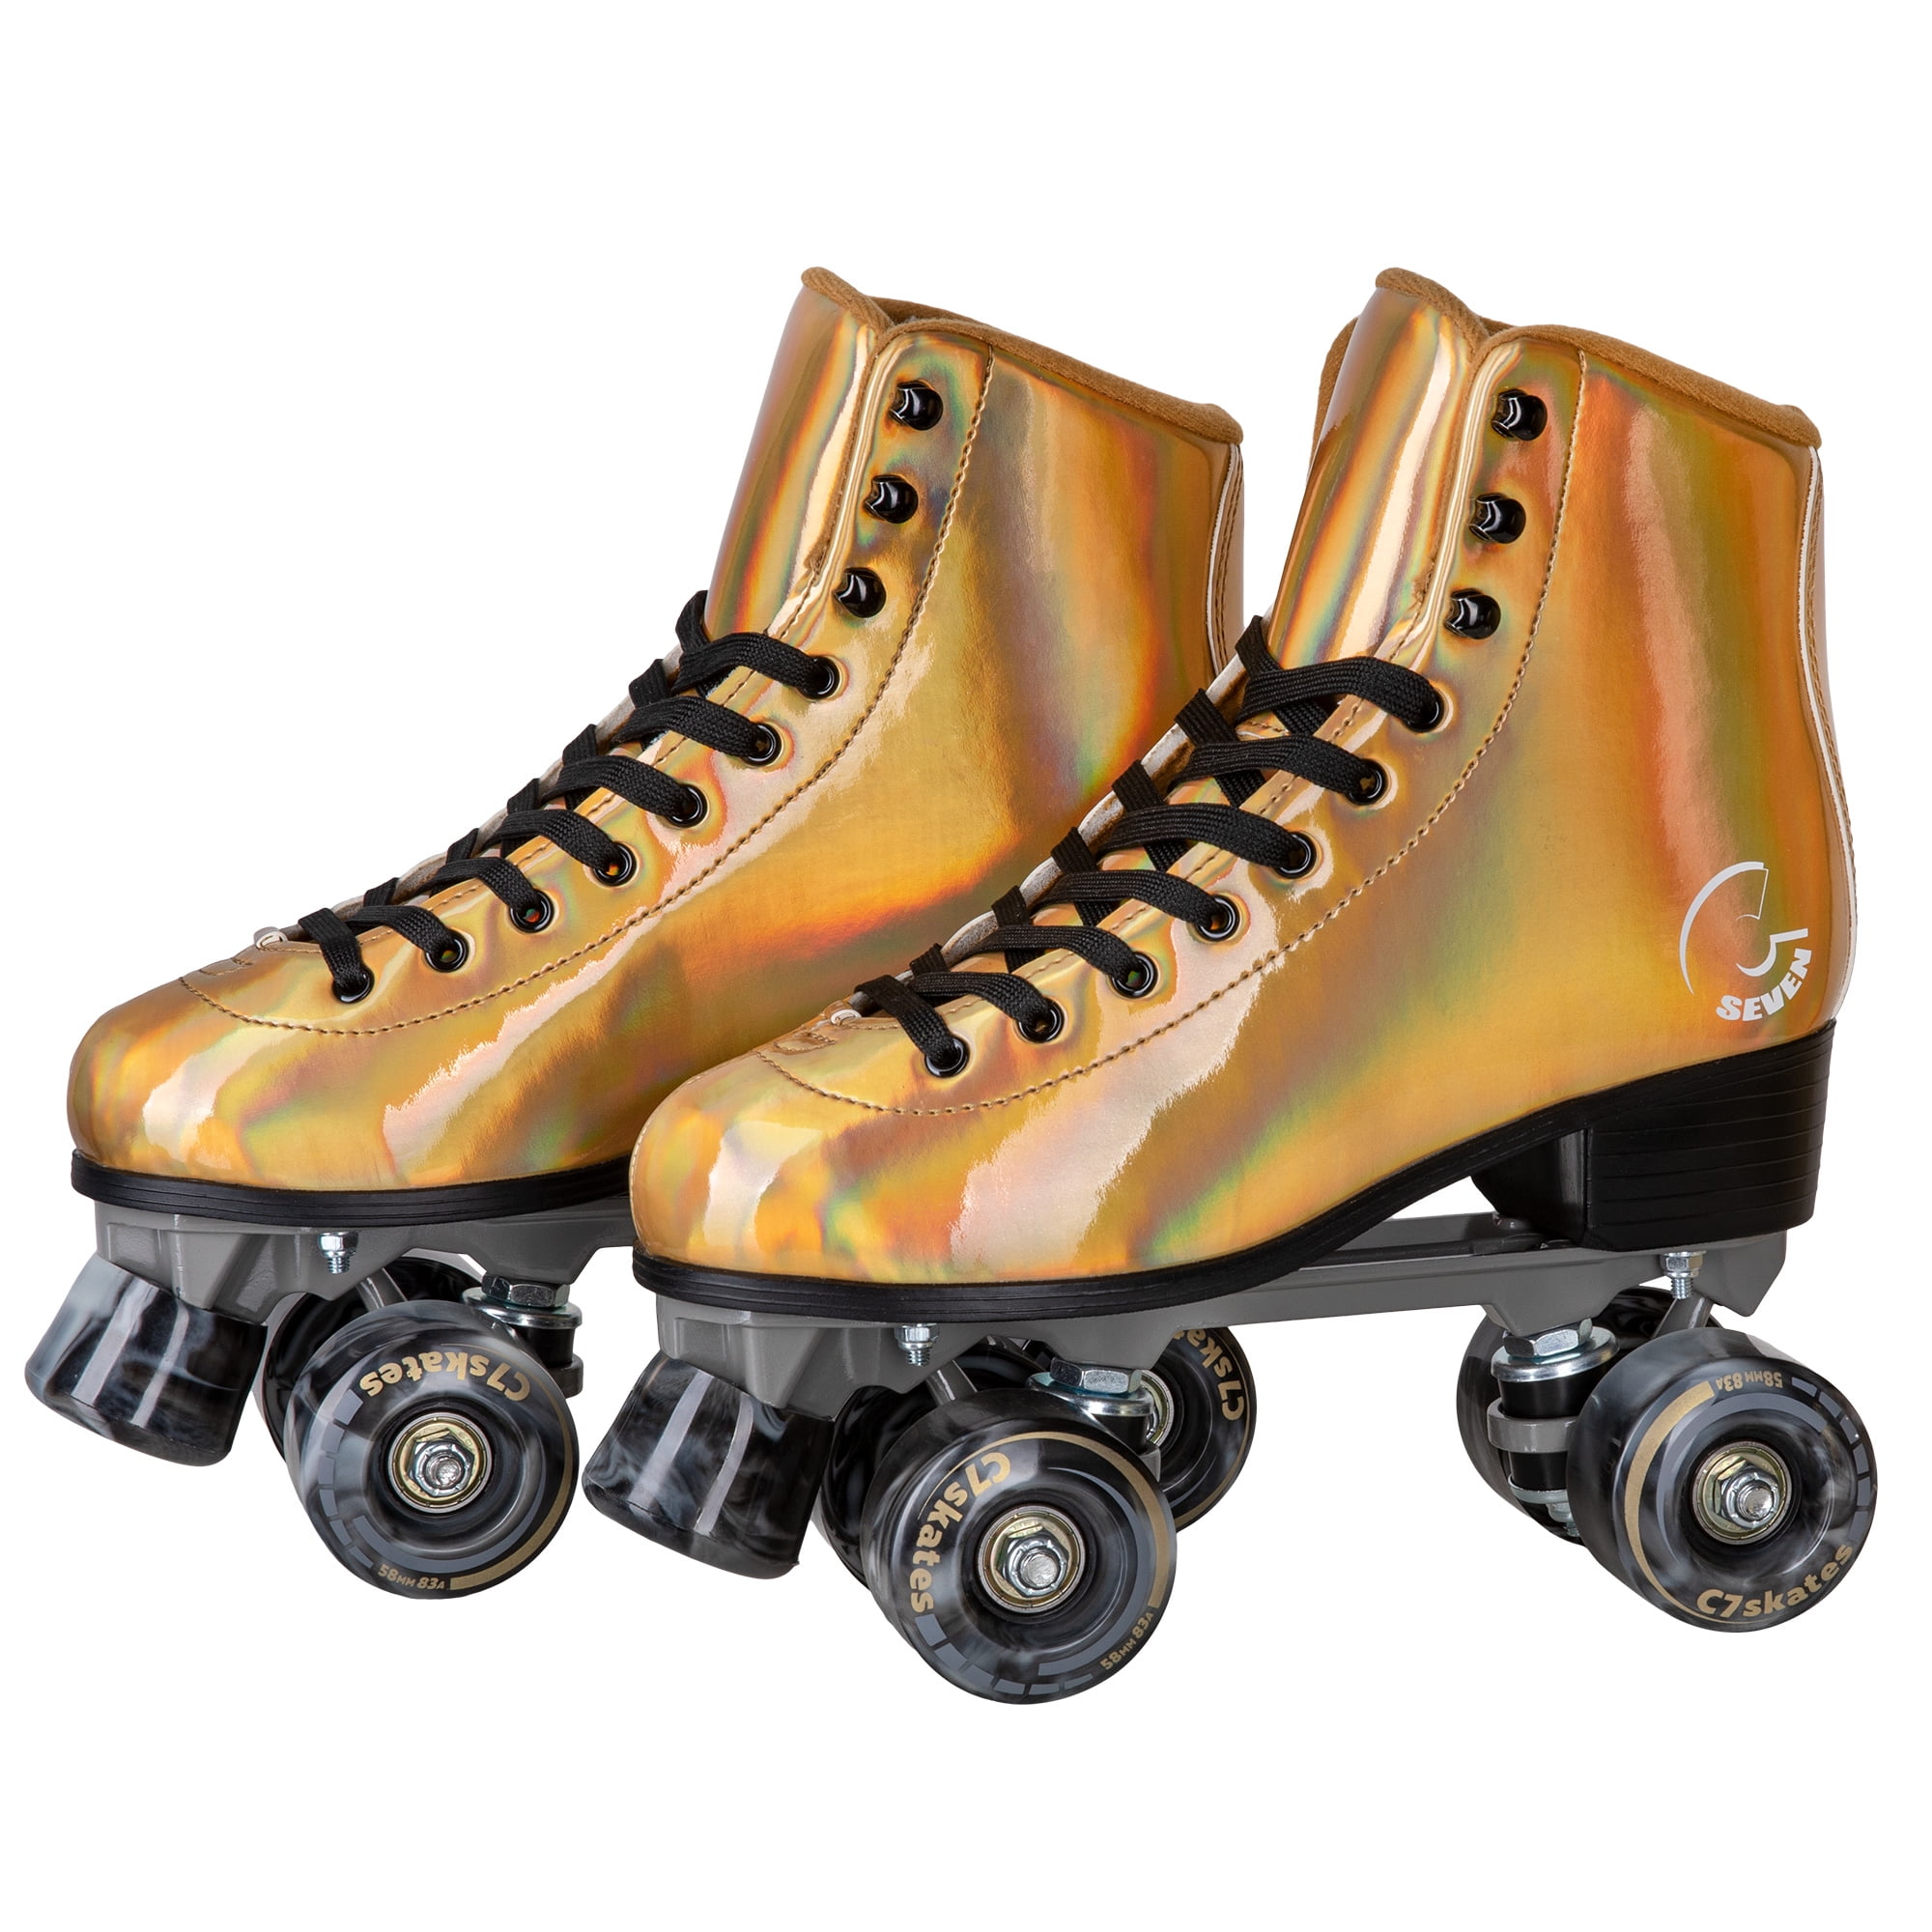 Details about   Roller Skate Roller Quad 4 Wheels Shoes Outdoor Sports Exercise High Cut Unisex 